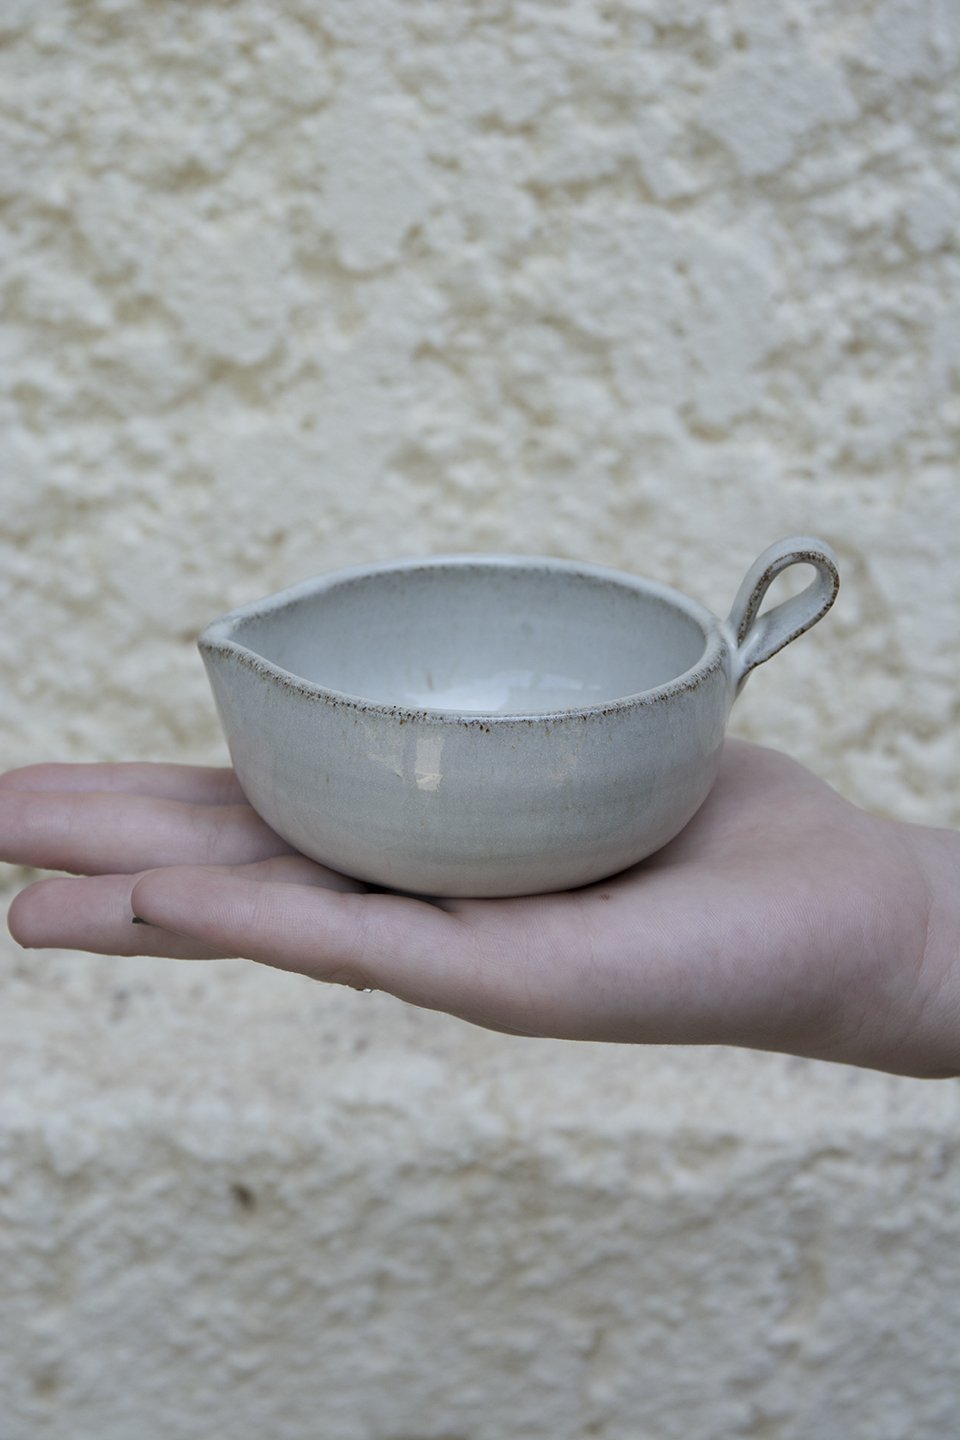 White Pottery Tea Bag Holder - Mad About Pottery - Bowl